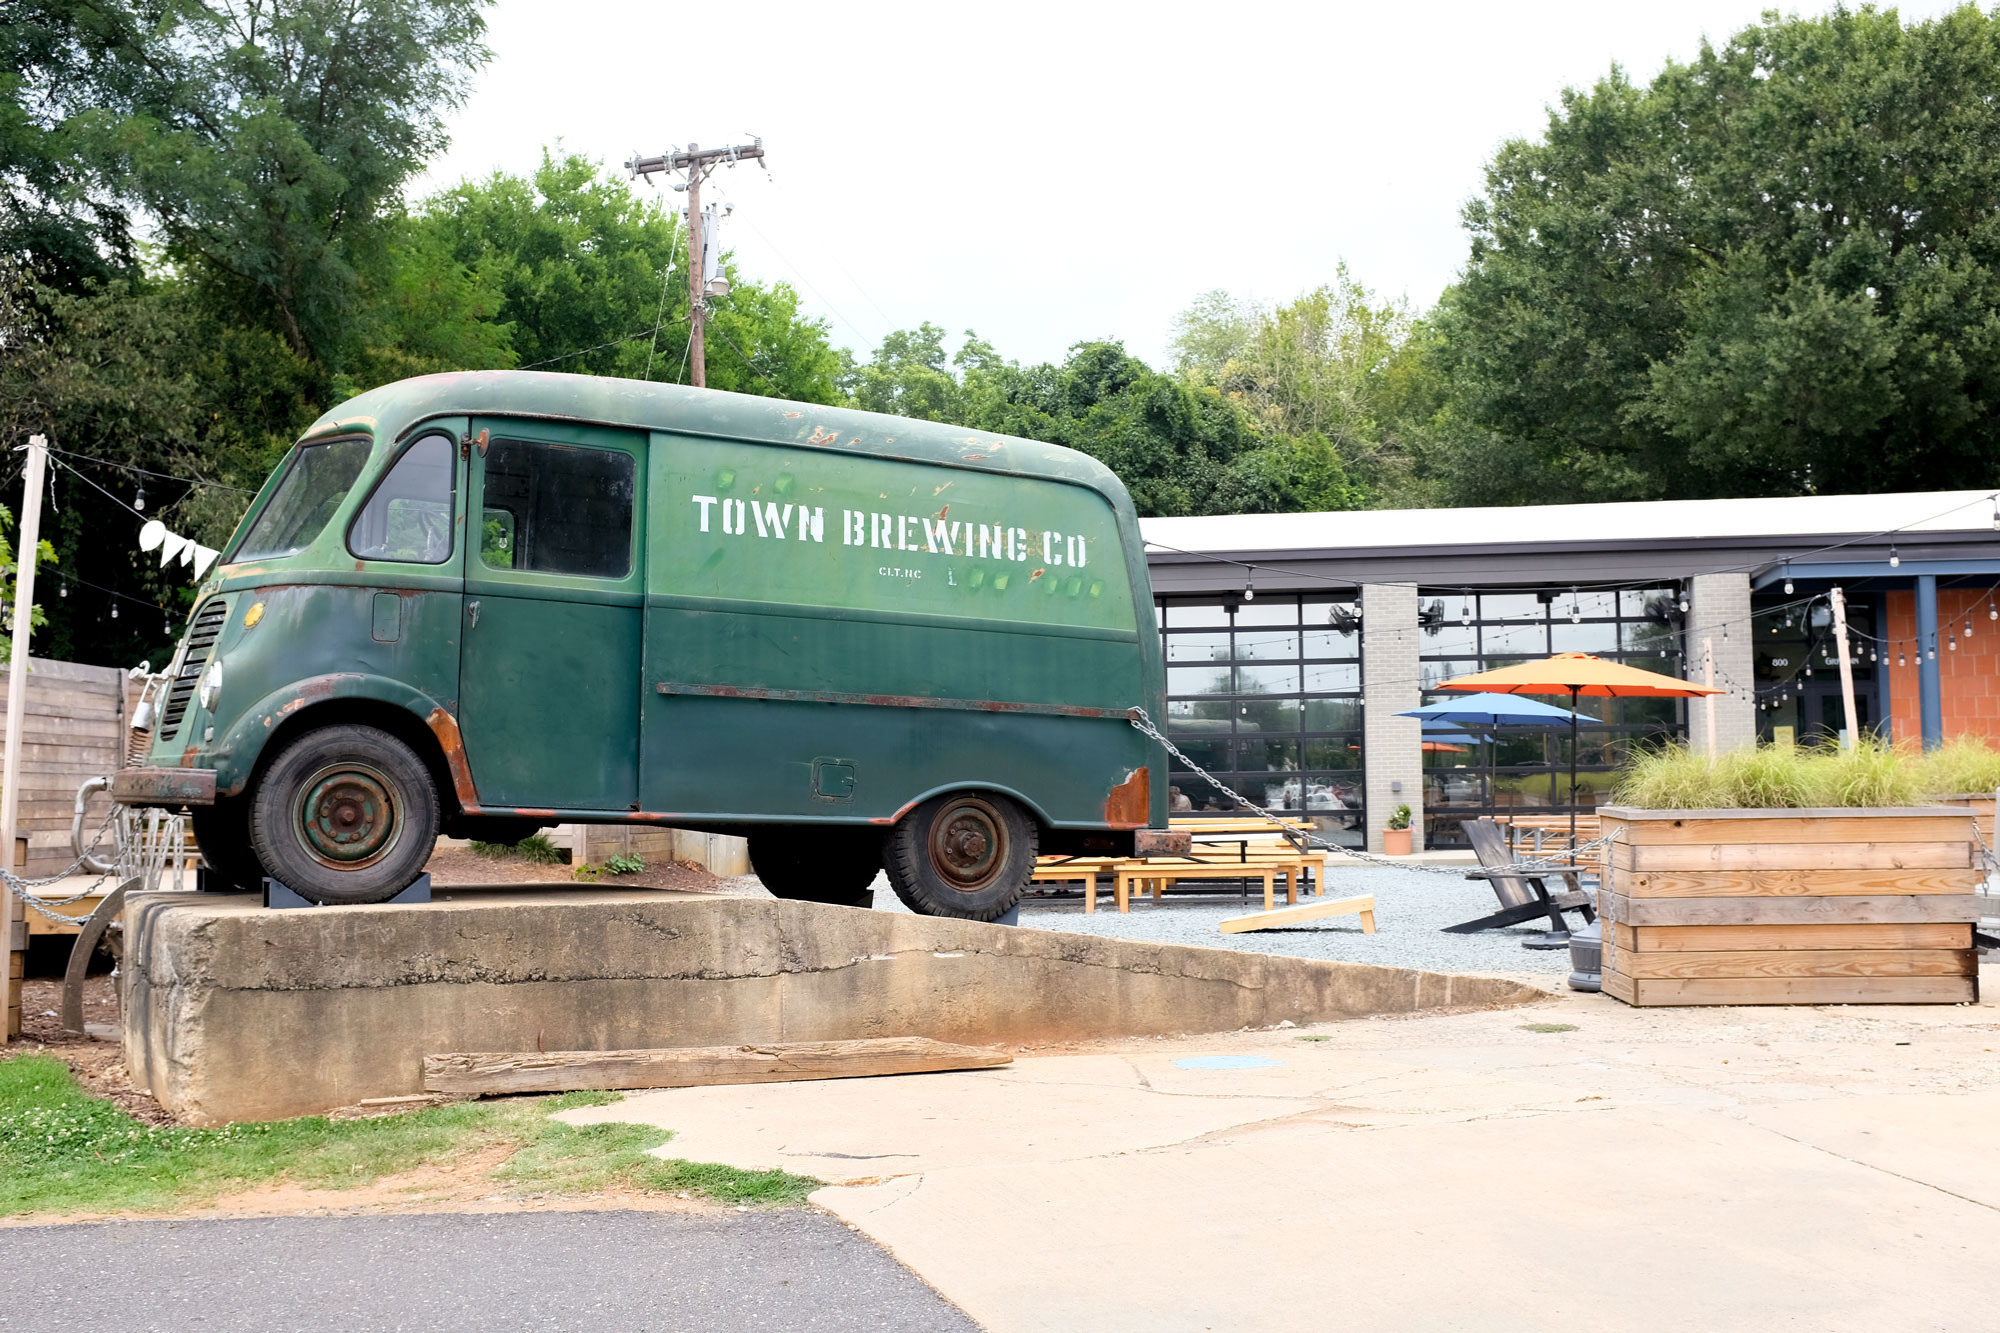 A green vintage van that says Town Brewing Co sits in front of an industrial-looking building